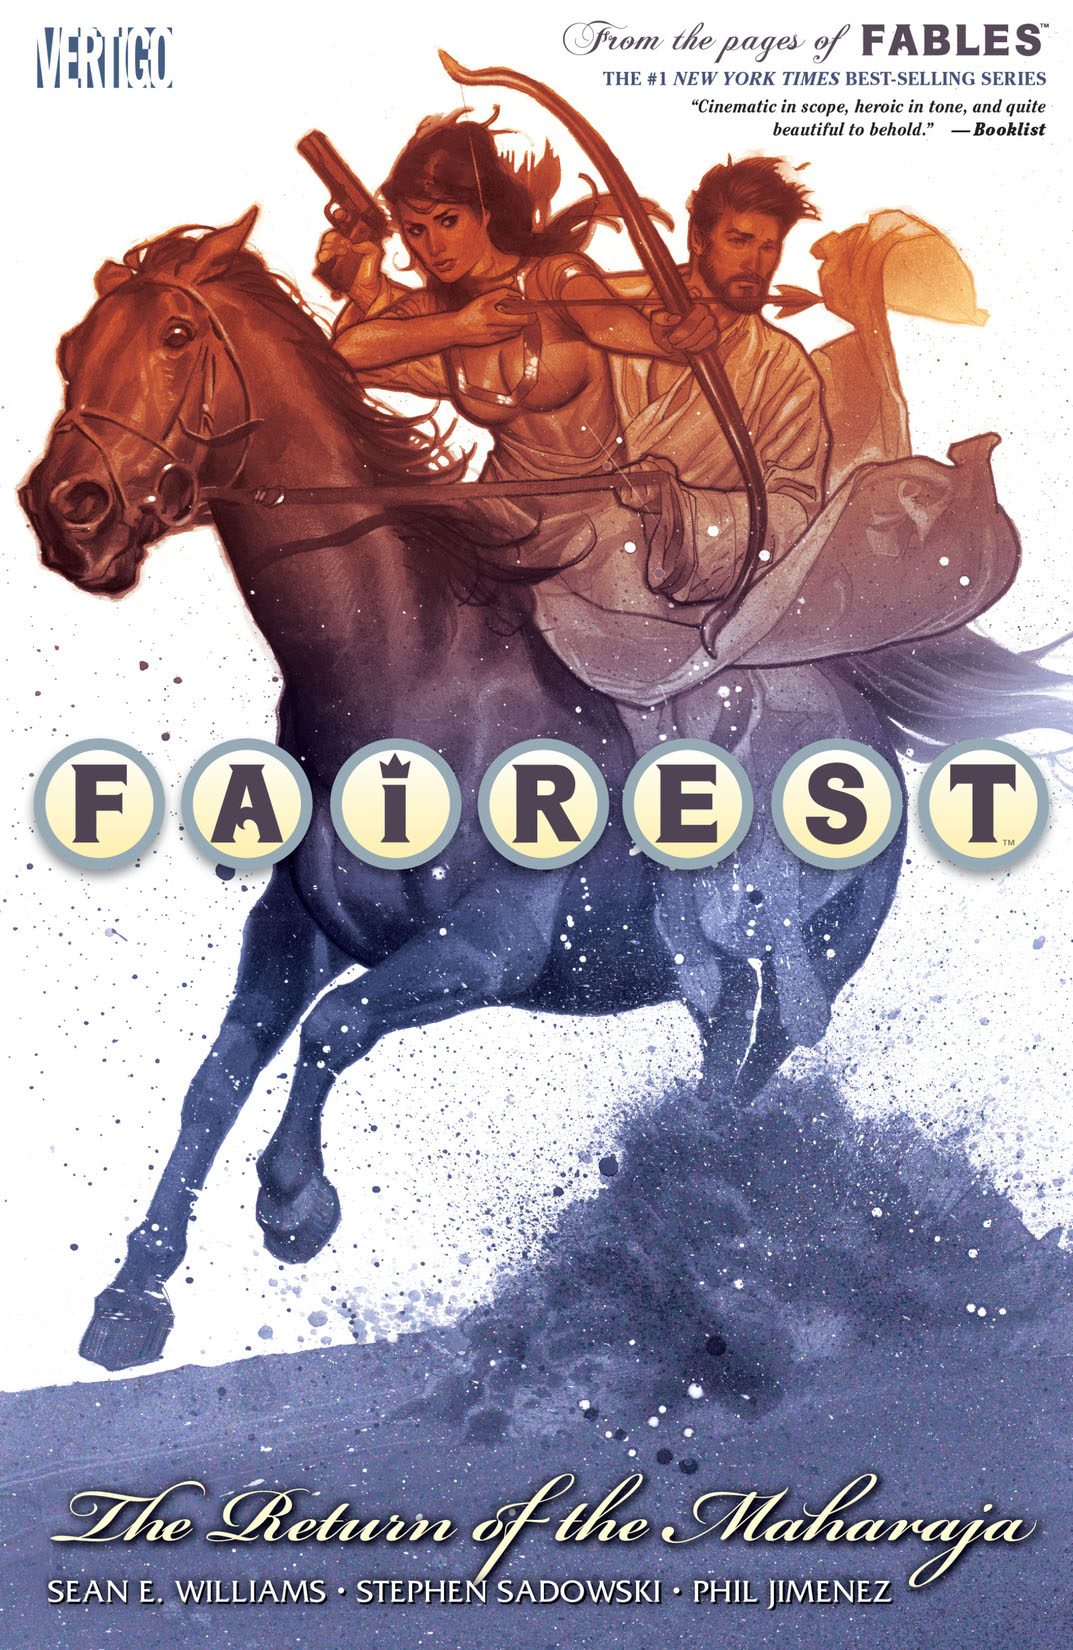 Fairest Vol. 3: The Return of the Maharaja preview images